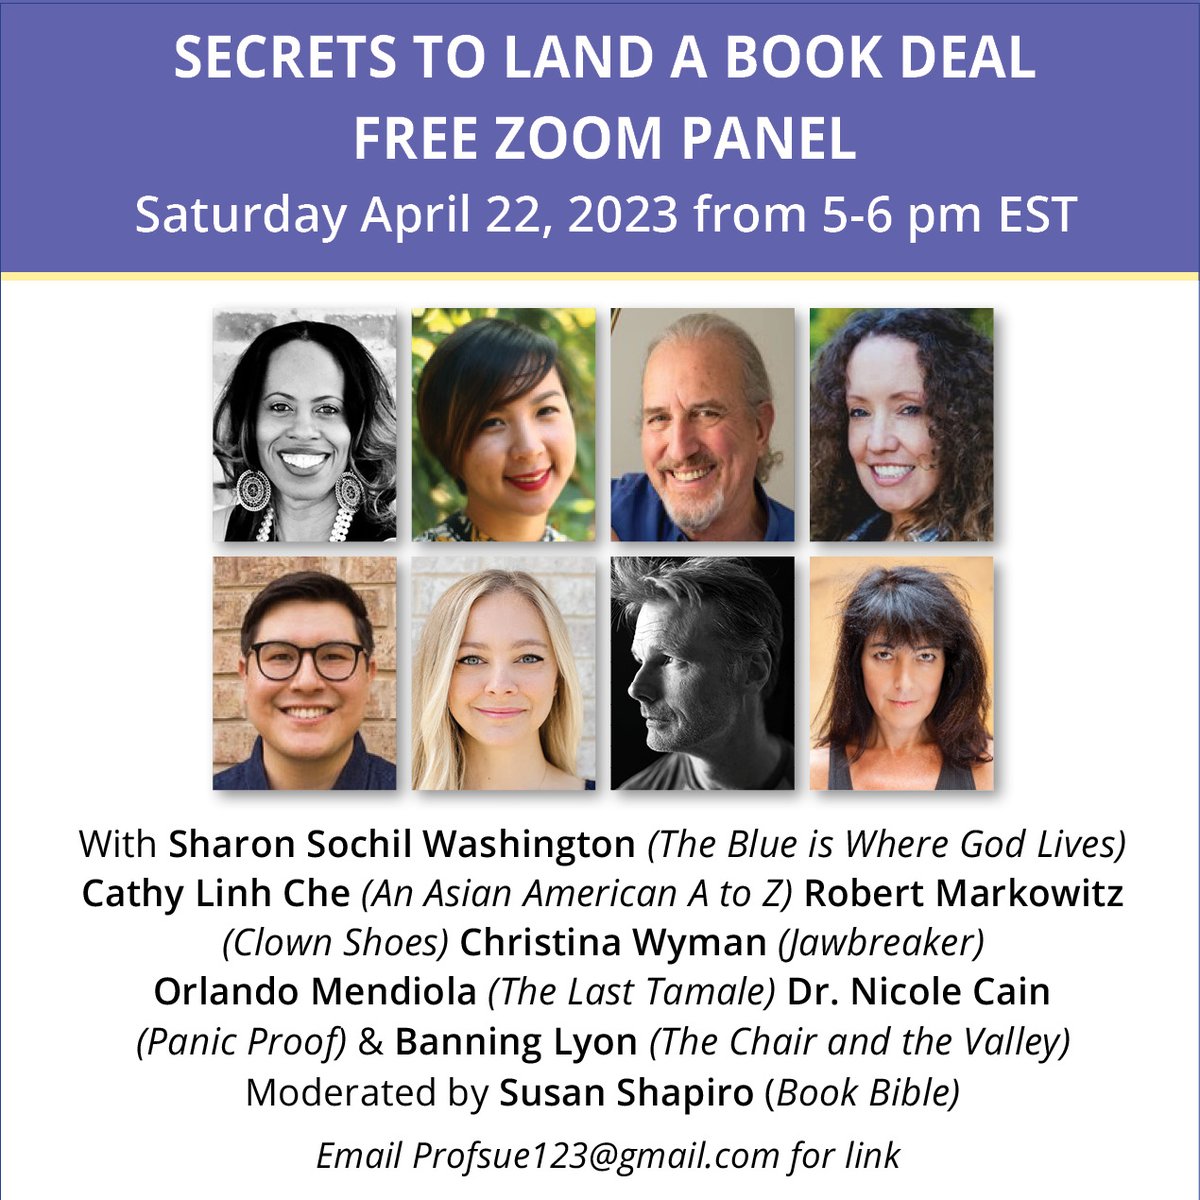 Free #zoom panel Saturday 4/22 from 5-6 pm EST with former students who have brilliant new upcoming #books: @callmecochi @CBWymanWriter @cathylinhche @BanningLyon @DrNicoleCain Robert Markowitz & Orlando Mendiola. Email me for the link #novel #memoir #poetry #selfhelp #kidlit